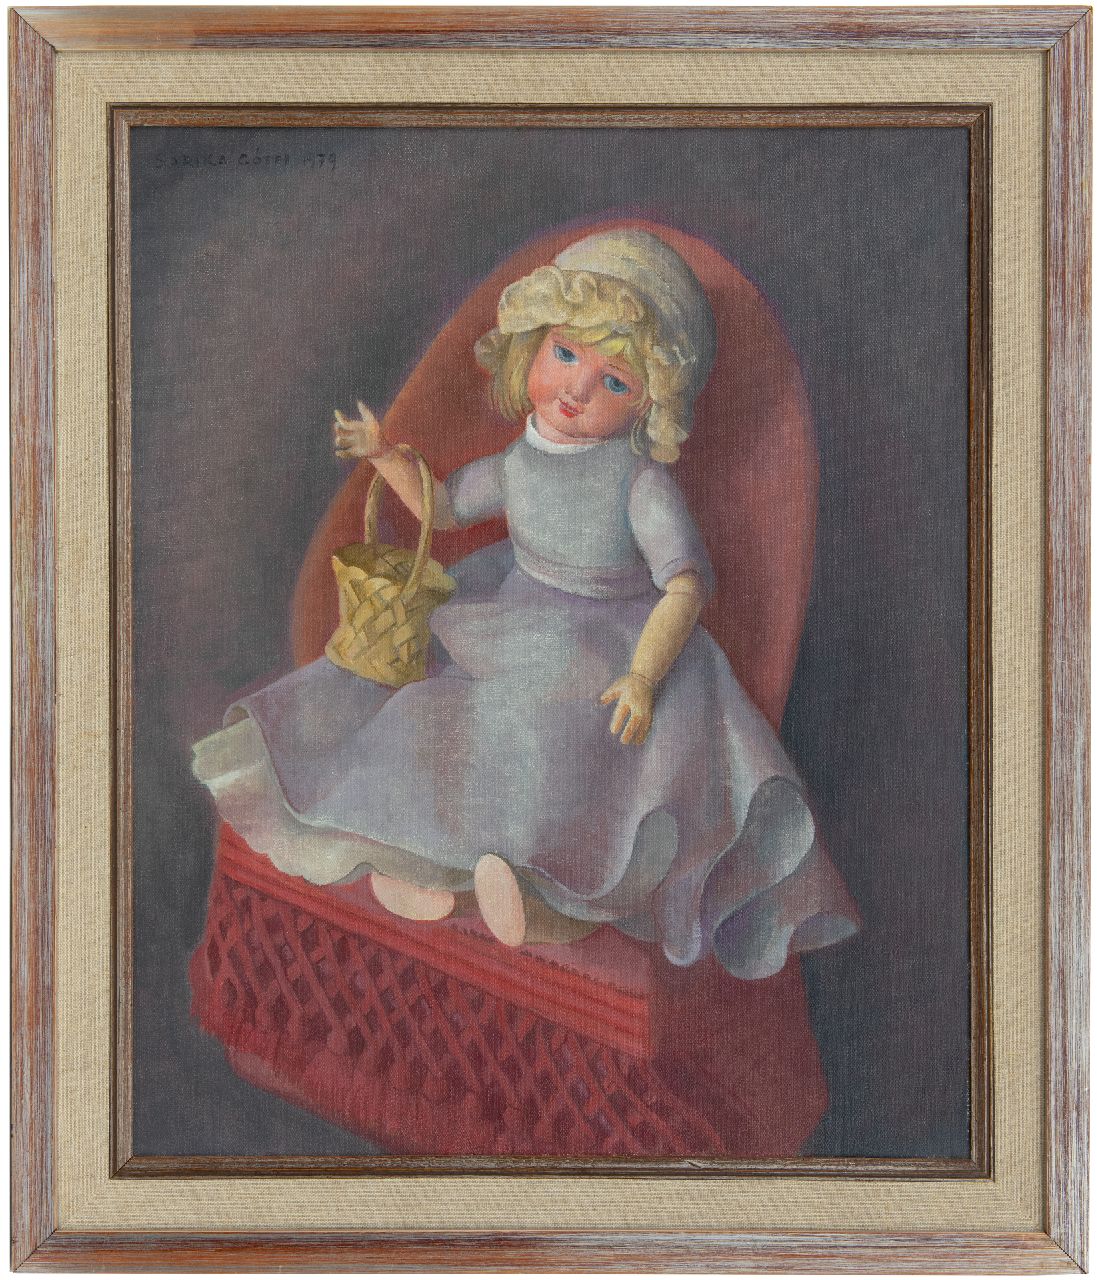 Góth C.  | Charlotte 'Sarika' Góth | Paintings offered for sale | A doll in a chair, oil on canvas 58.2 x 47.2 cm, signed u.l. and dated 1979